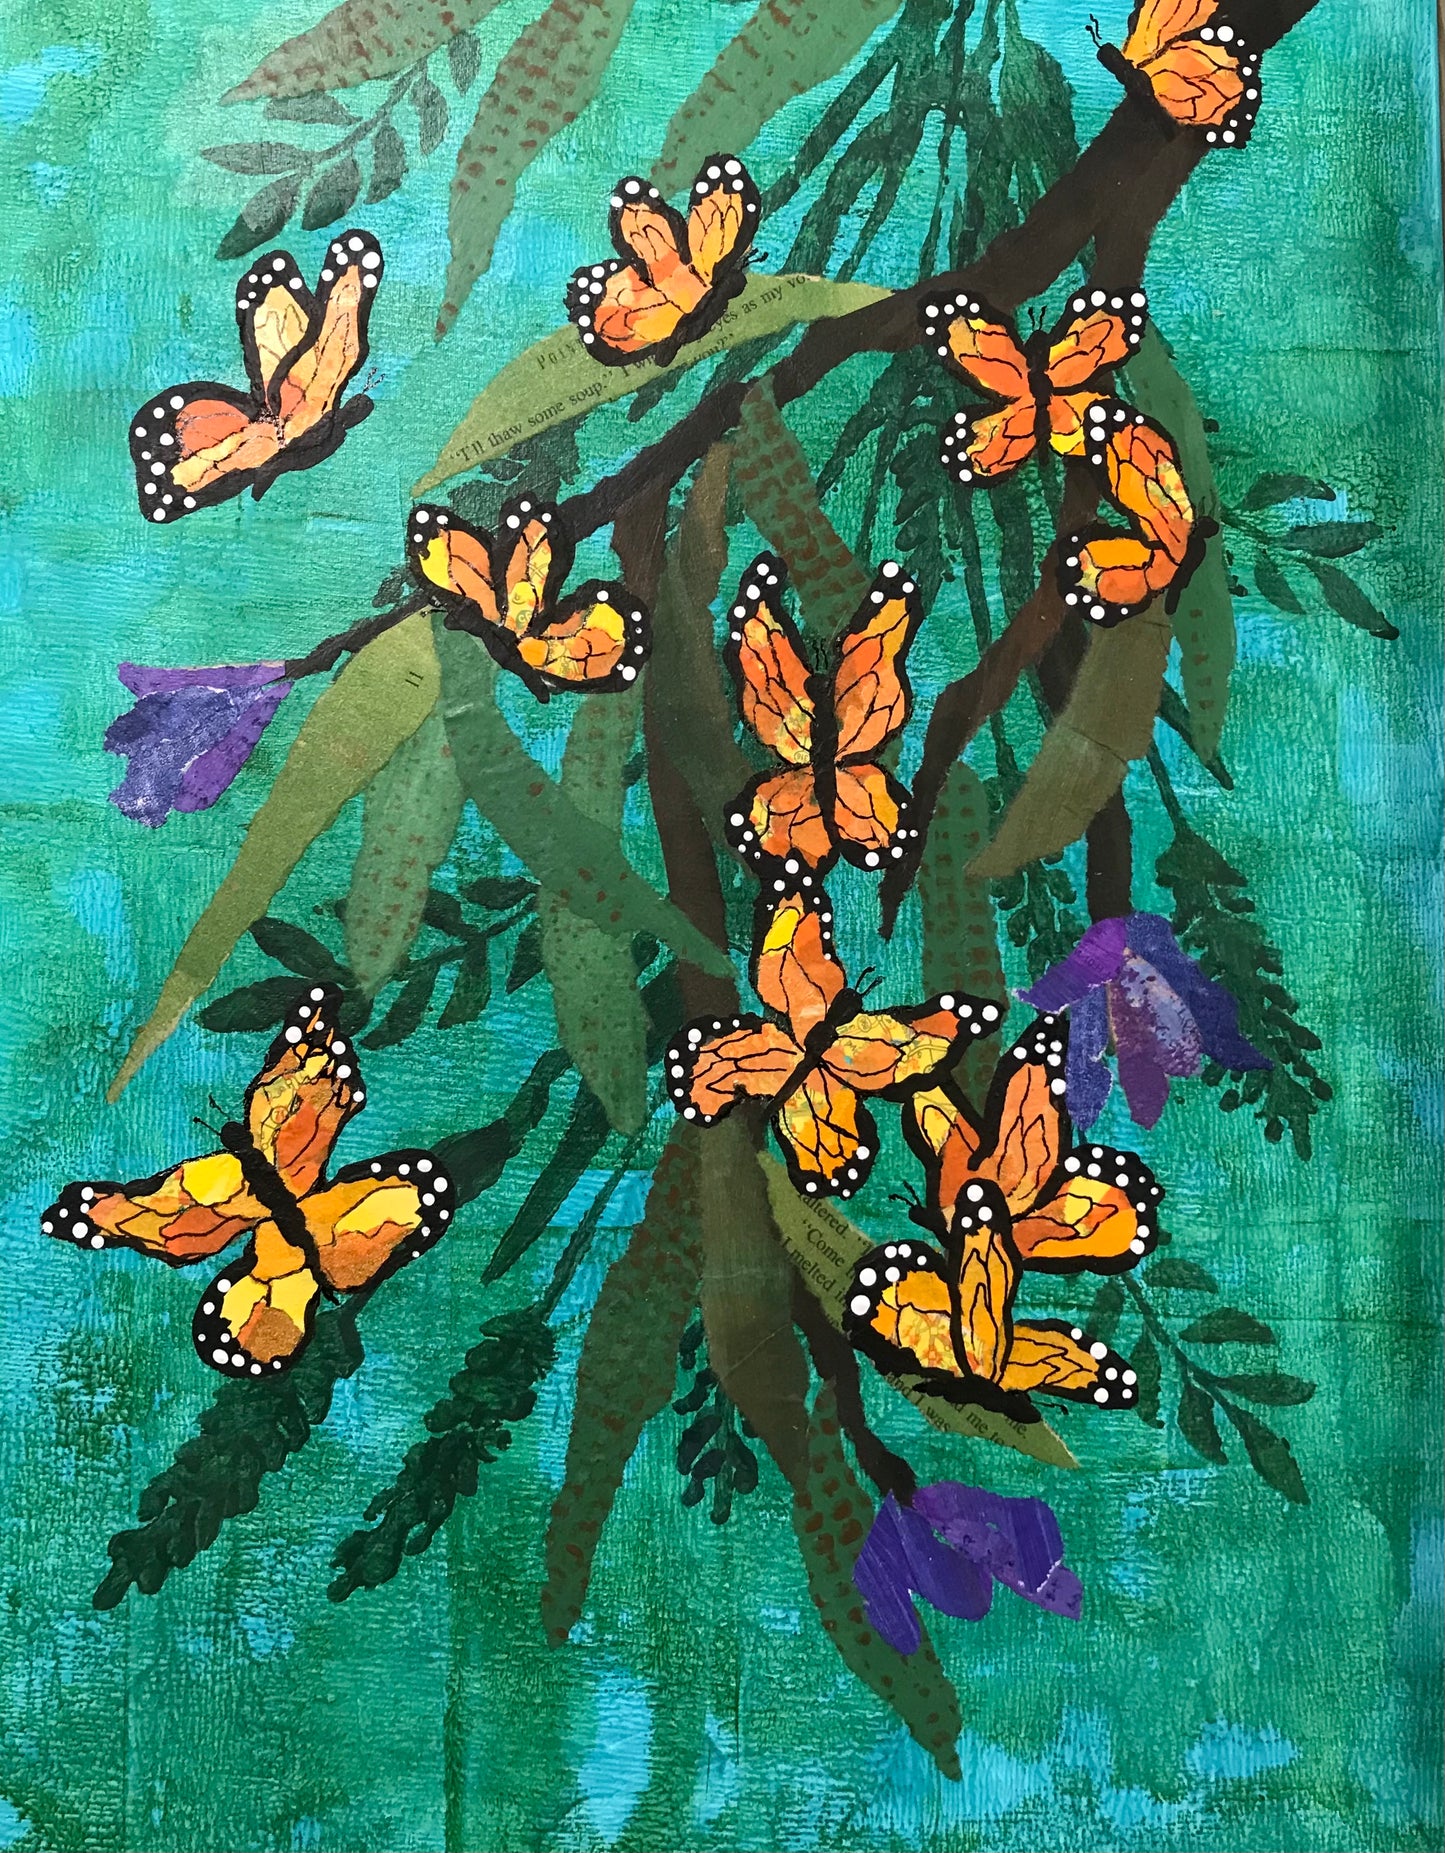 Rice Paper Butterfly workshop at ArtSocial 805